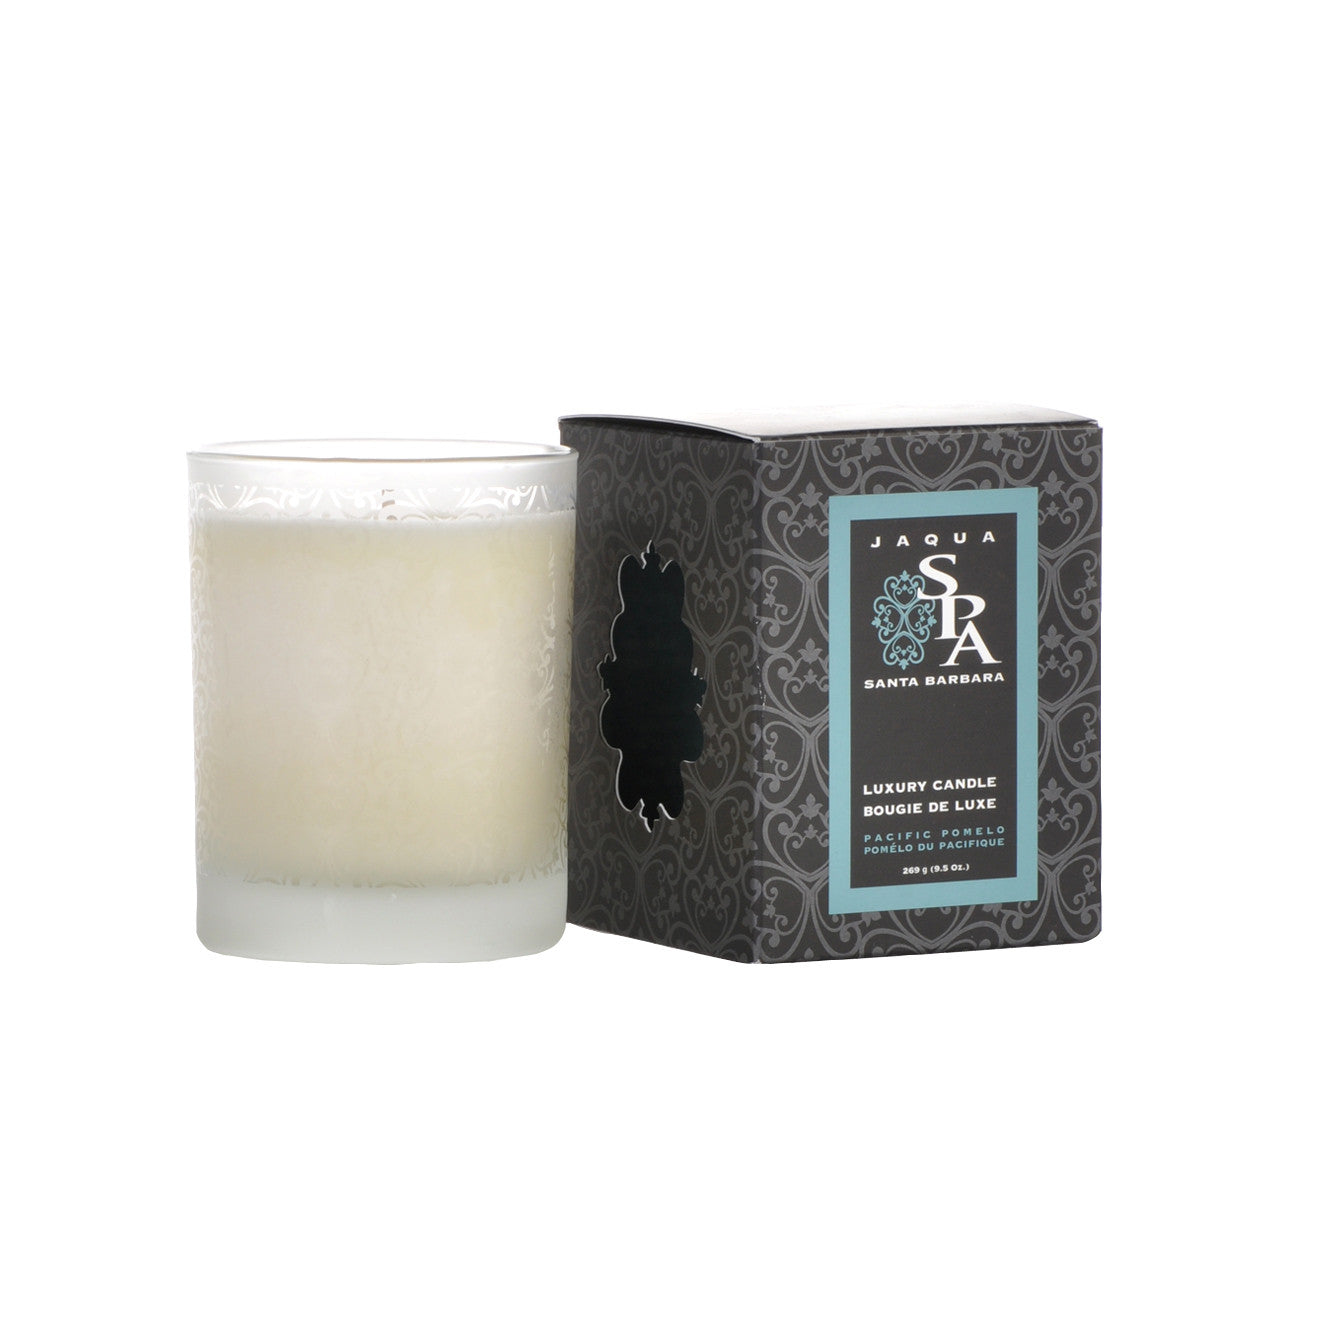 Pacific Pomelo Boxed Luxury Candle